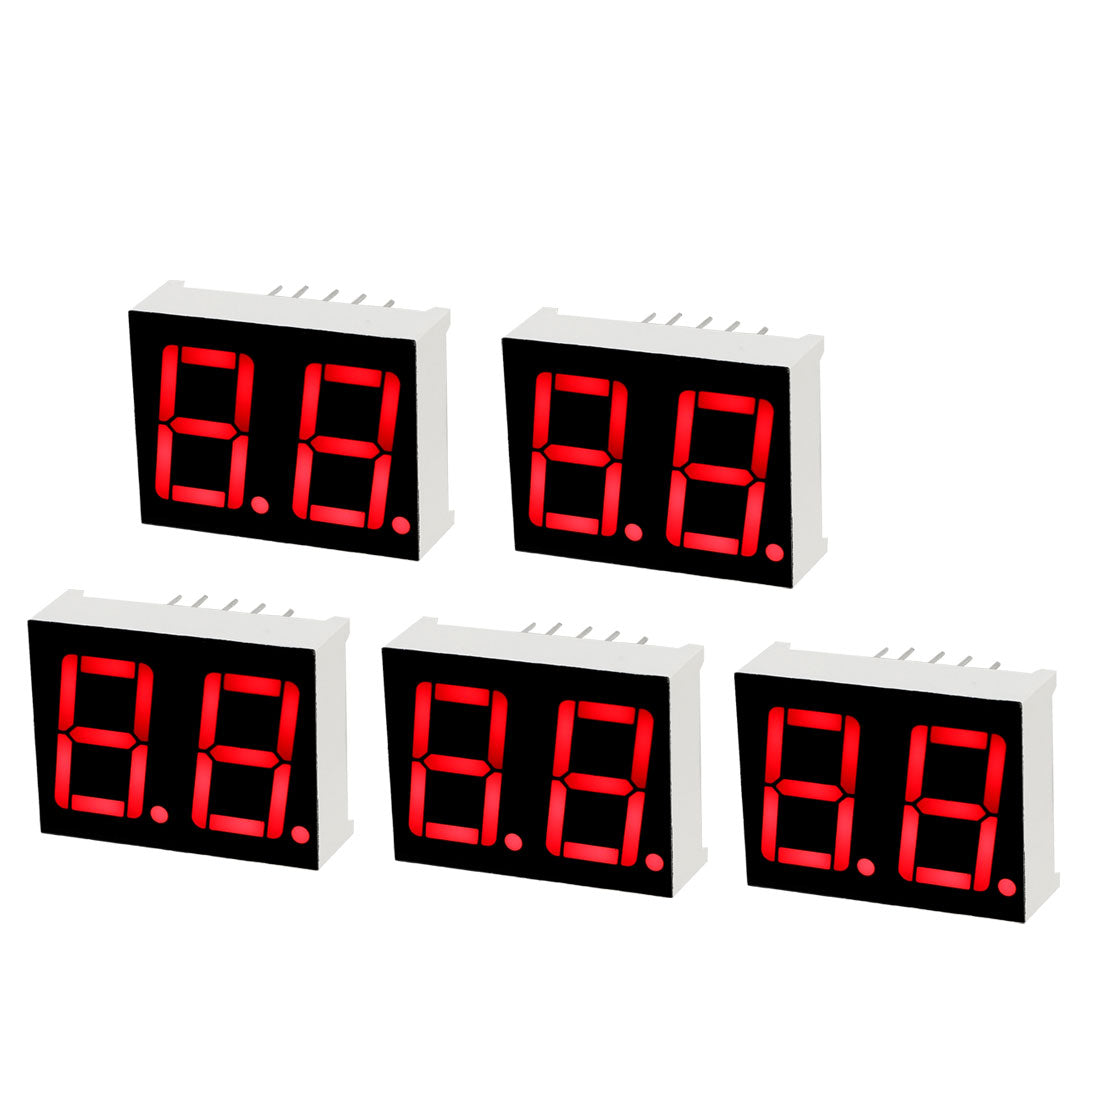 uxcell Uxcell Common Cathode 10 Pin 2 Bit 7 Segment 0.98 x 0.75 x 0.31 Inch 0.55" Red LED Display Digital Tube 5pcs